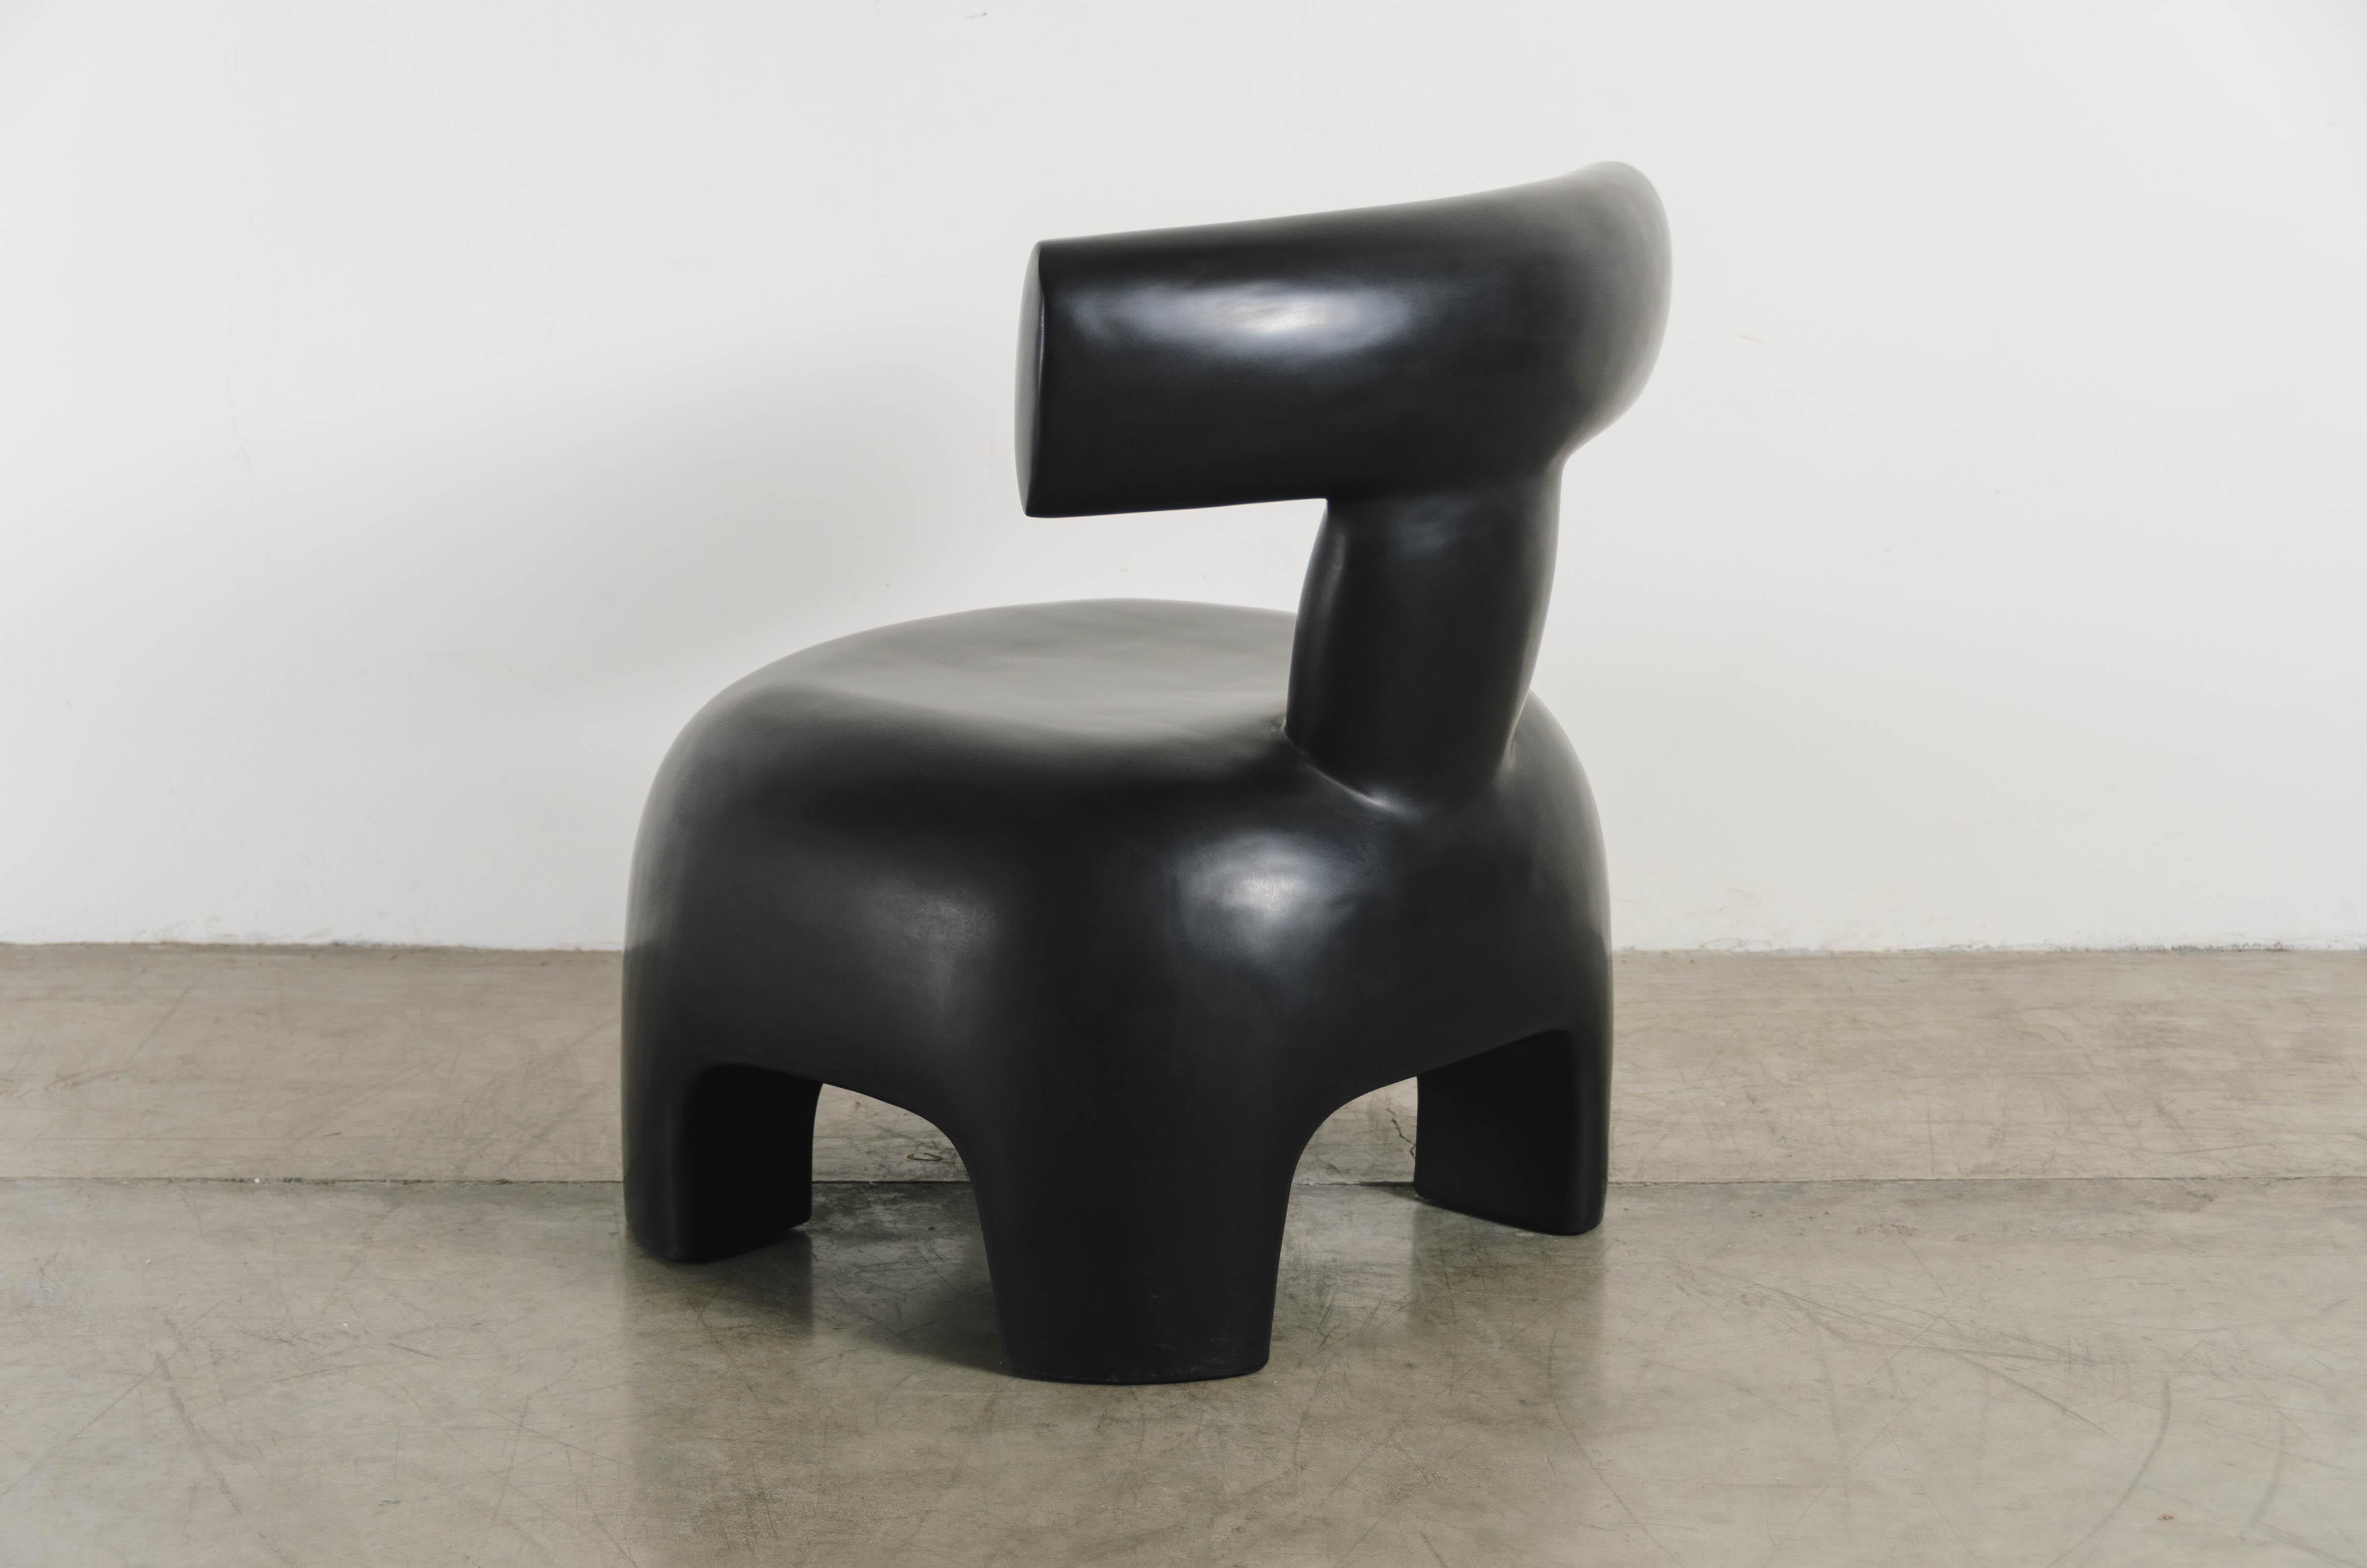 Repoussé Back Rest Chair, Black Lacquer by Robert Kuo, Handmade, Limited Edition